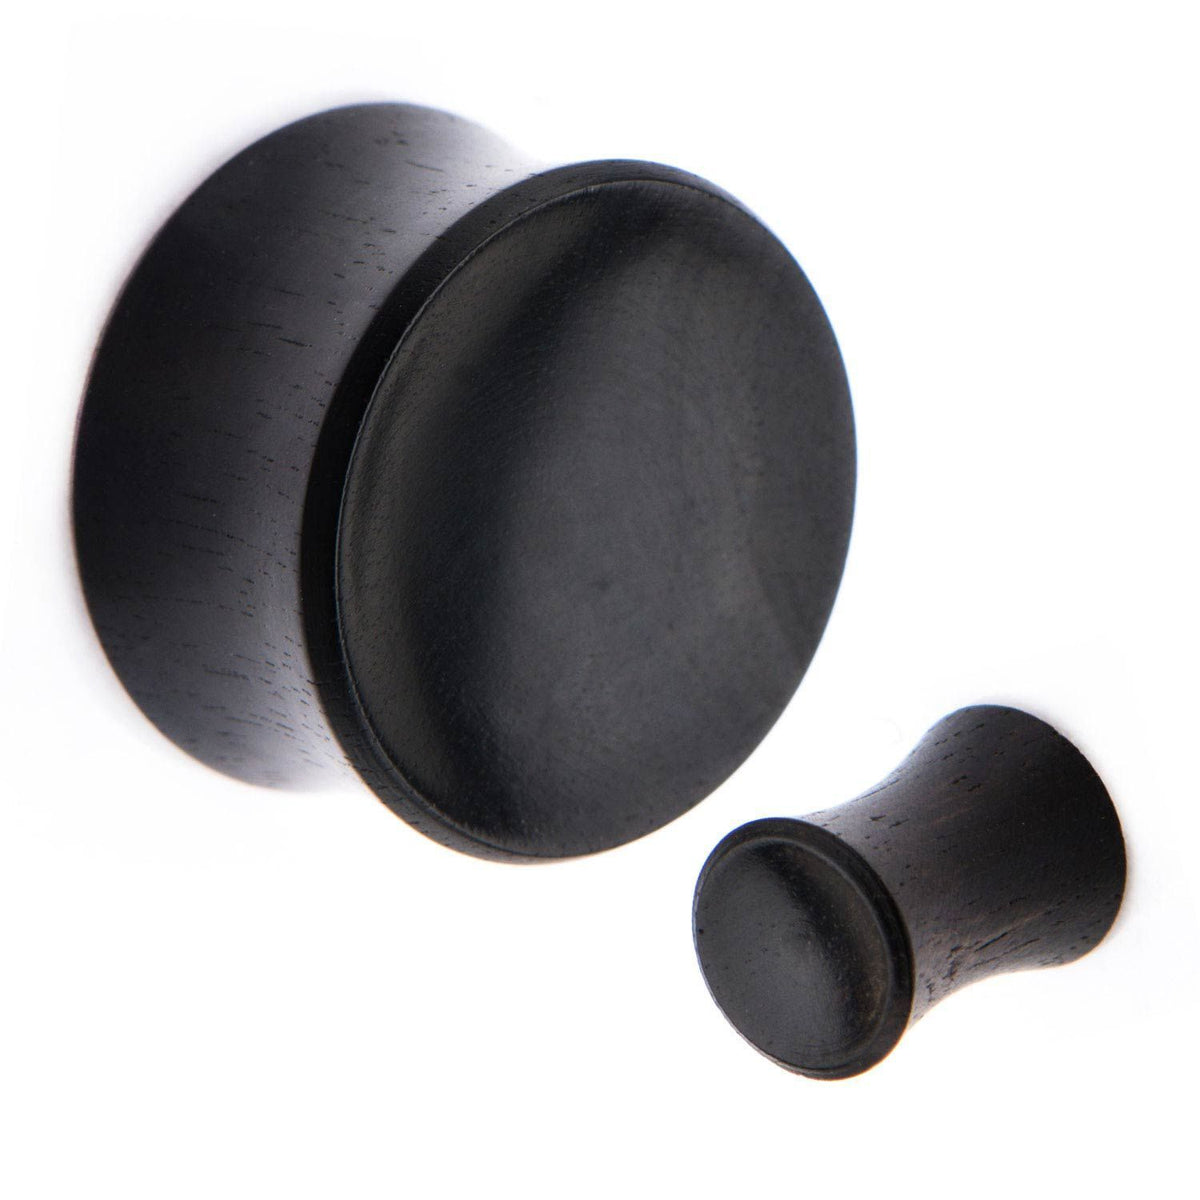 Double Flare Iron Wood Concave Plugs - 1 Pair sbvwpl019i